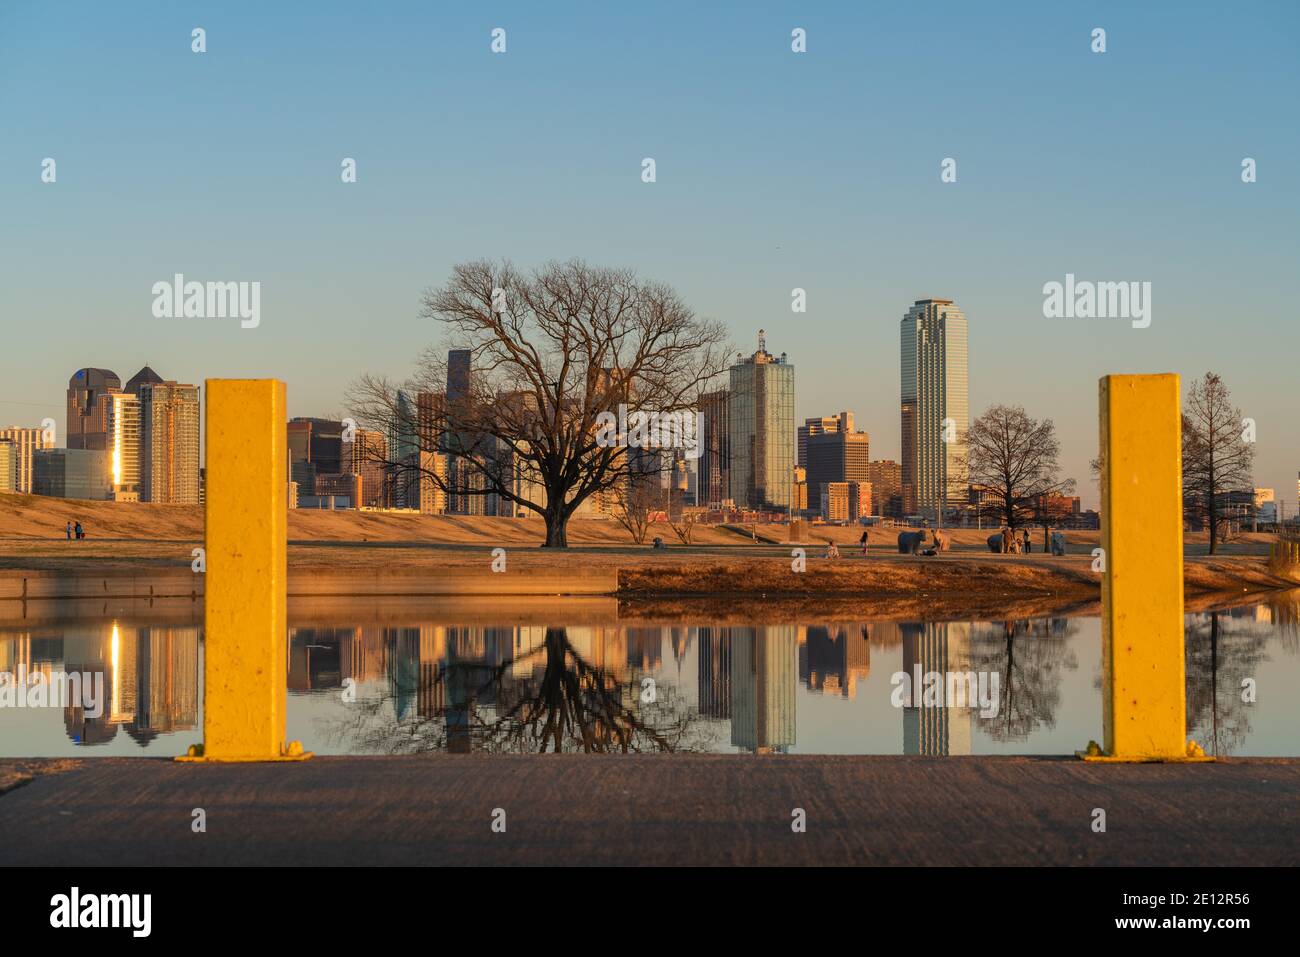 People relaxing at Trammell Crow Park with a view of the Dallas, Texas skyline in the background and reflecting pond in the foreground. Stock Photo